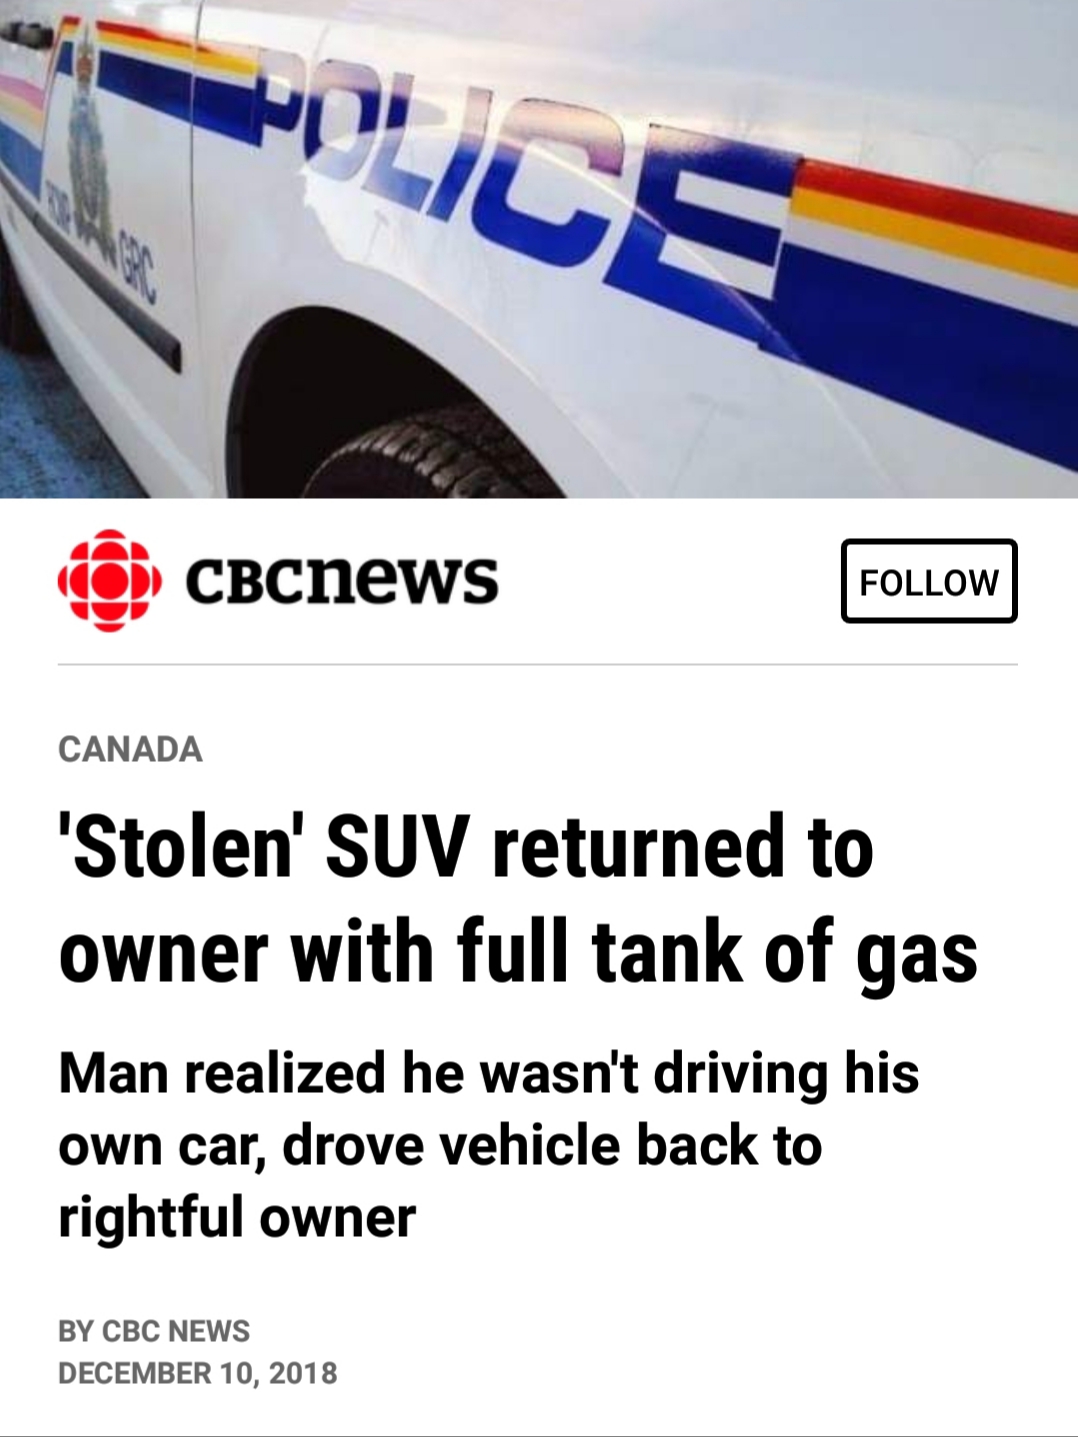 work meme with headline about car thief returning car with gas